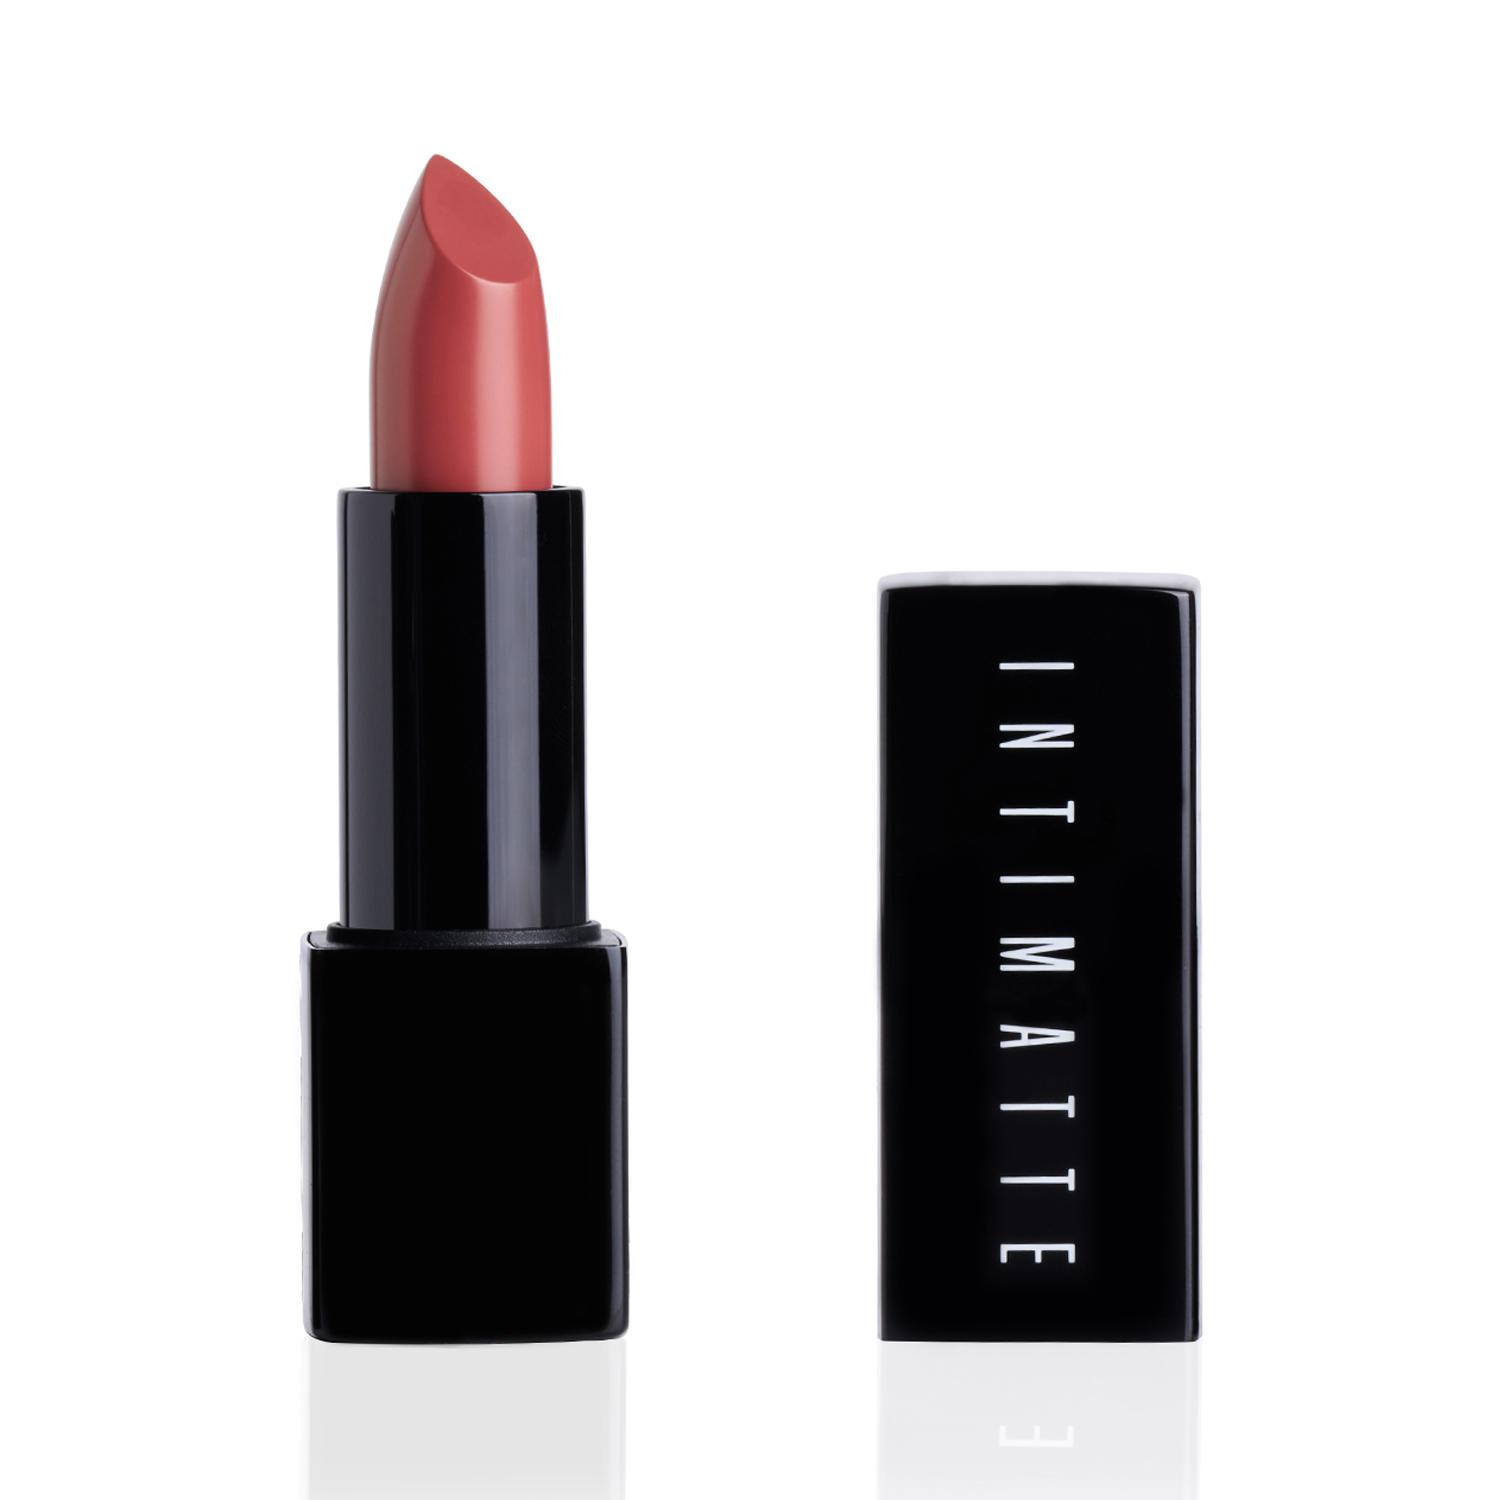 PAC | PAC Intimatte Lipstick - All You Need (4g)